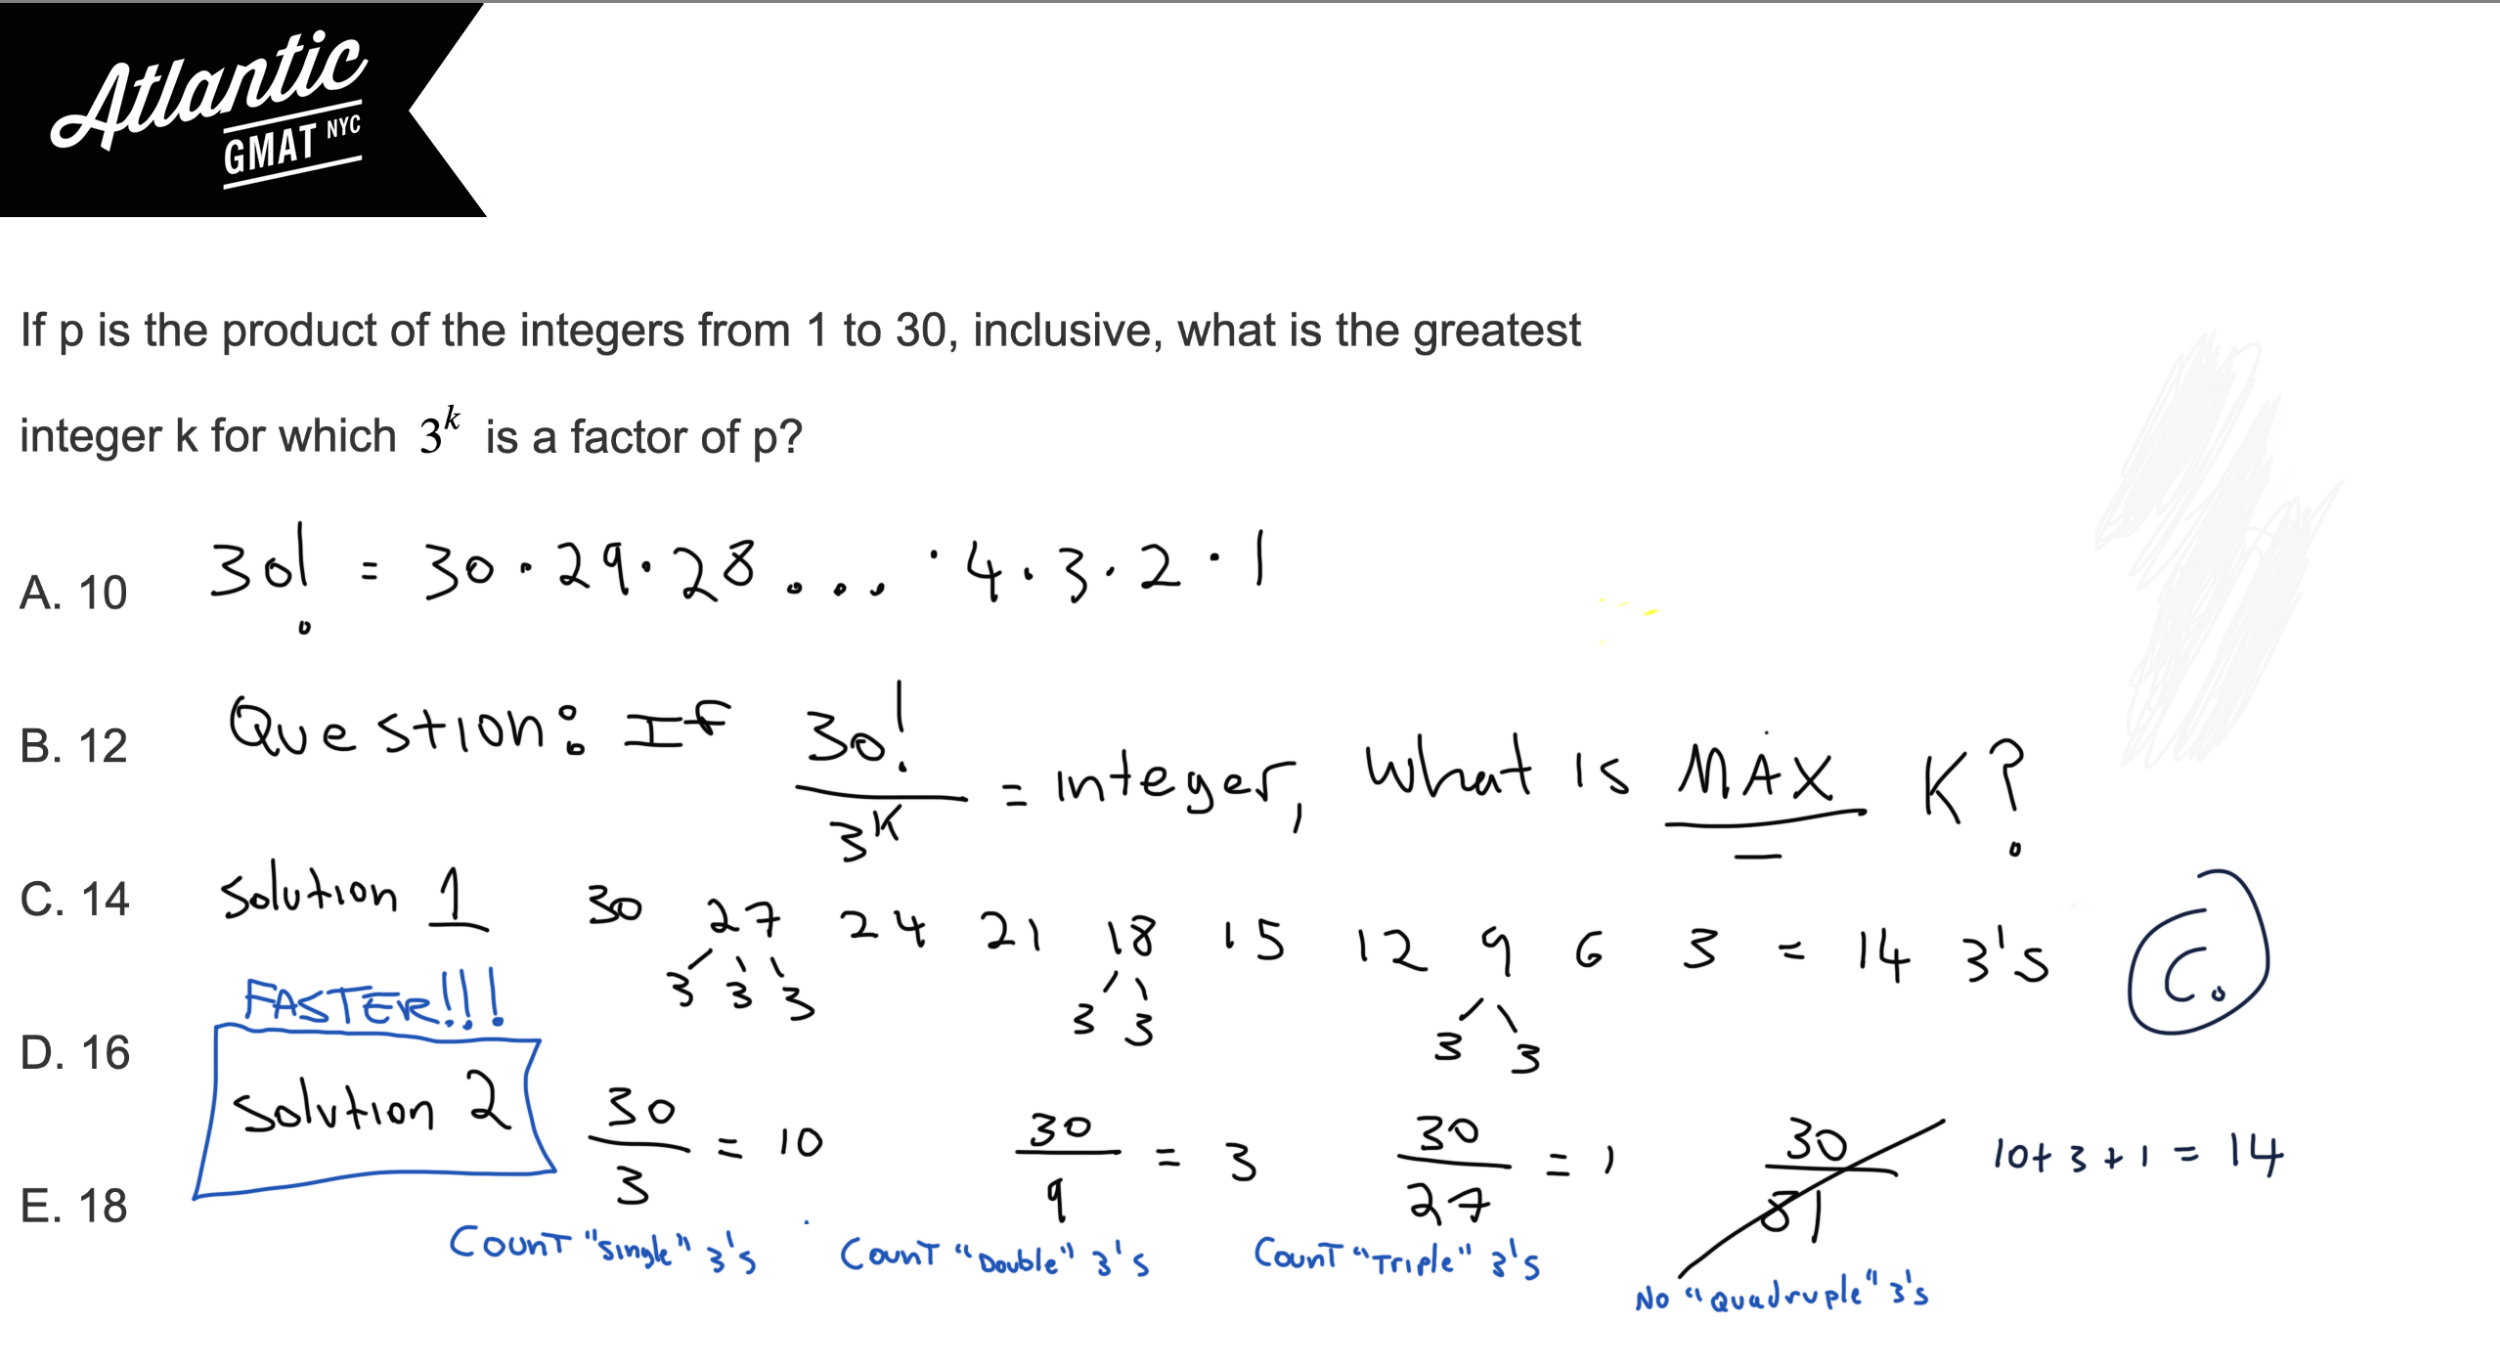 if p is the product of the integers from 1 to 30, inclusive, what is the greatest integer k for which 3k is a factor of p? gmat explanation diagram